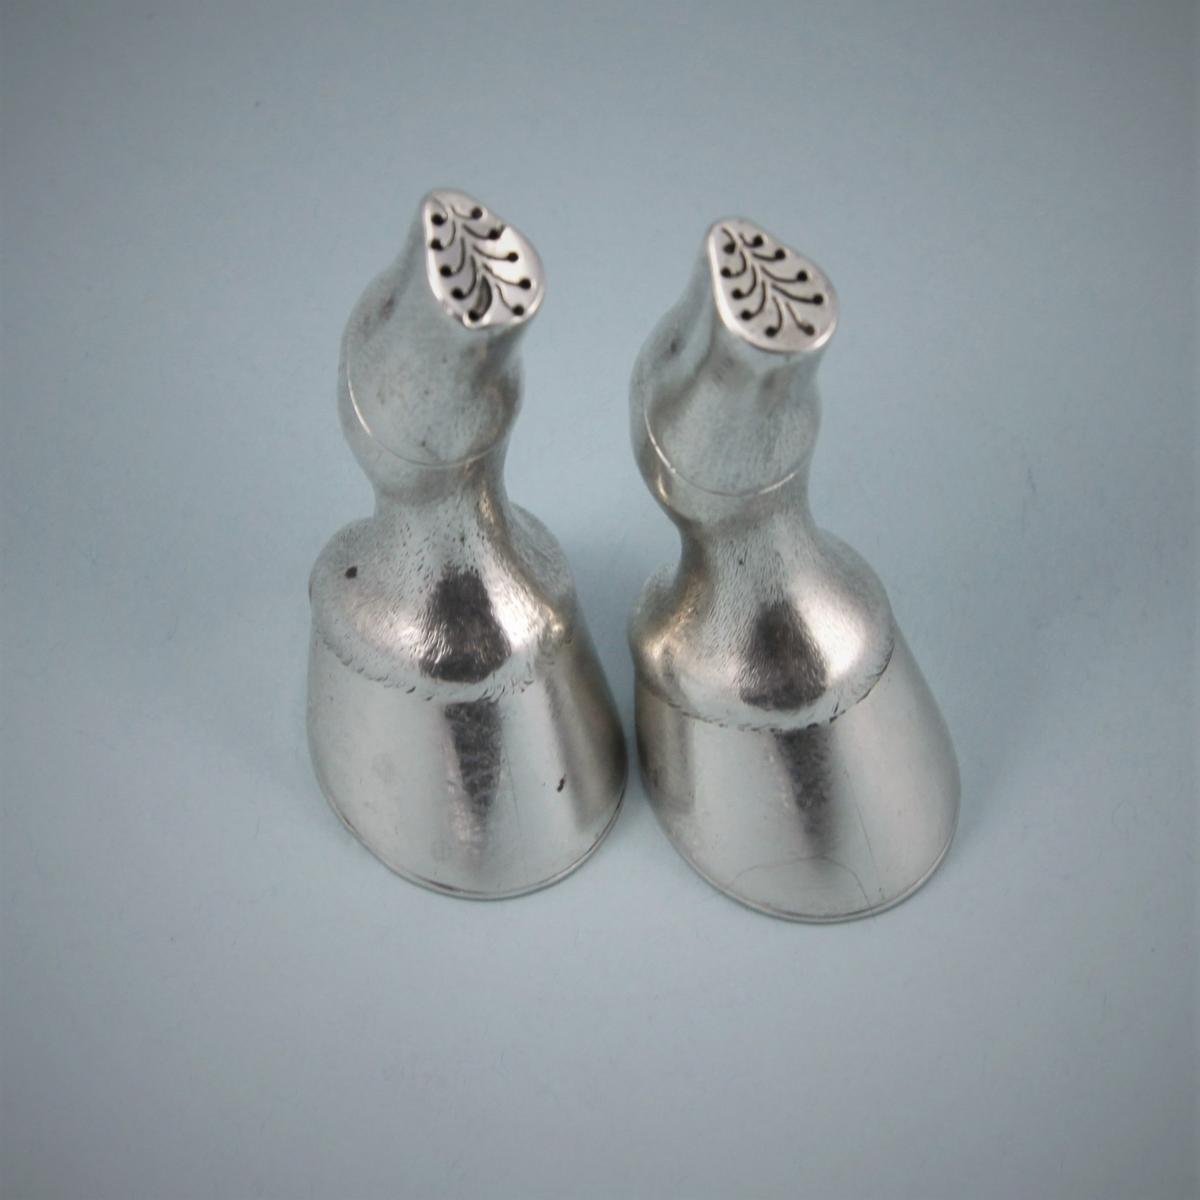 VICTORIAN Pair Sterling Silver Peppers in the Shape of Hooves by E H Stockwell. London 1877